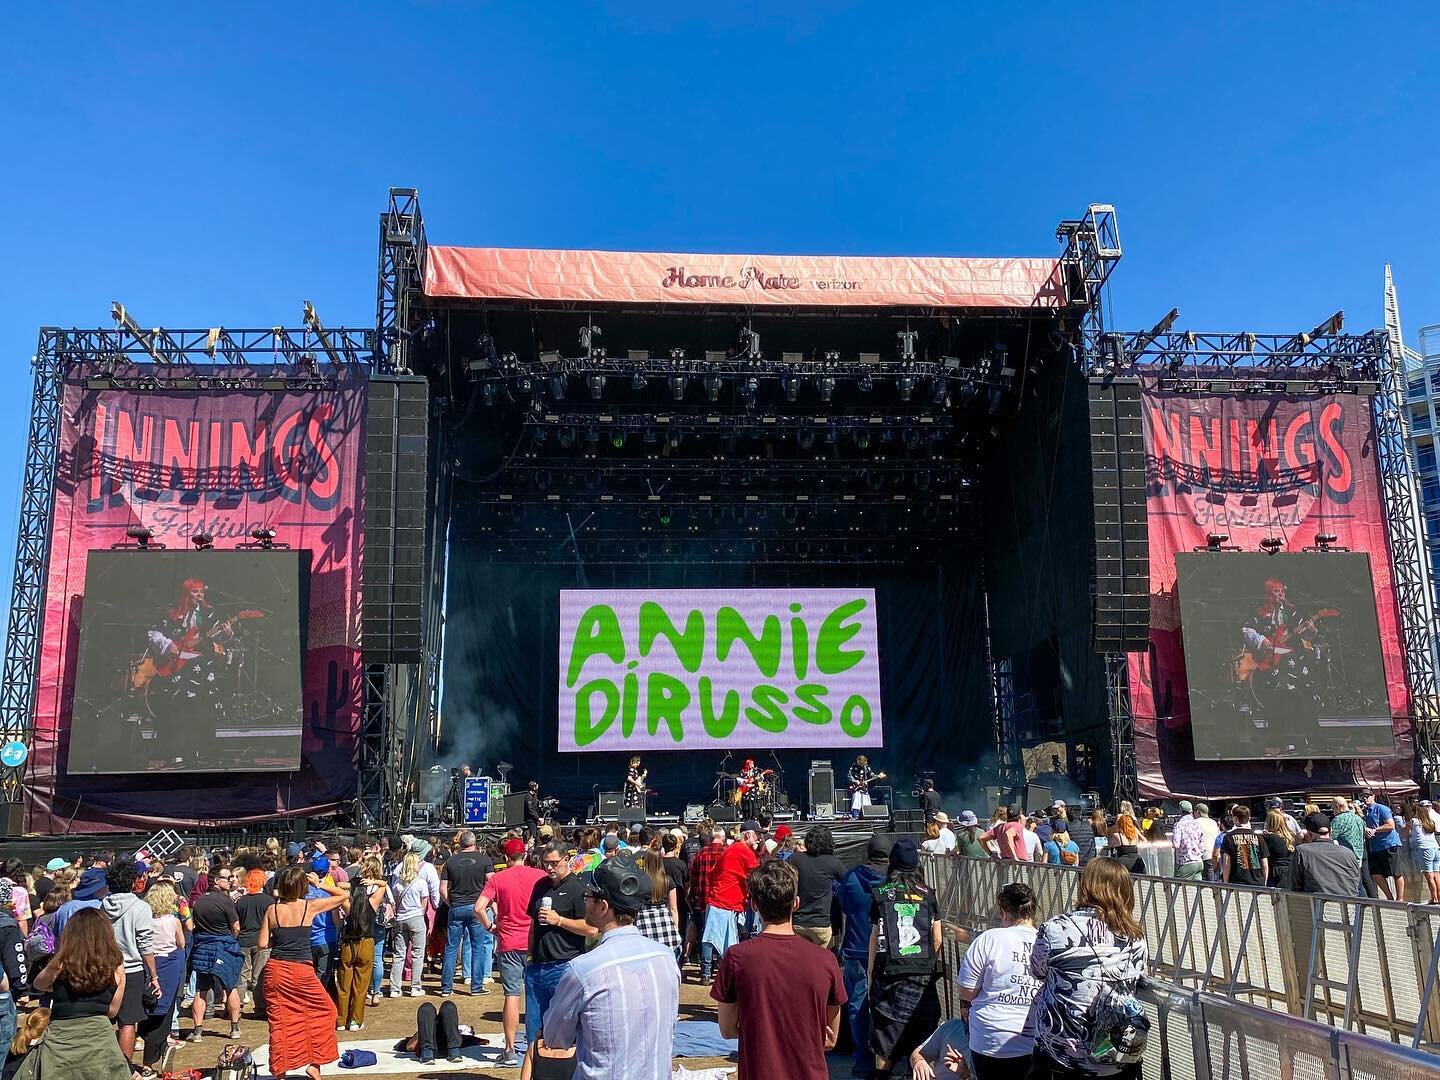 Kicking off DAY 1 of @inningsfest with @anniedirusso at the Home Plate stage 🔥